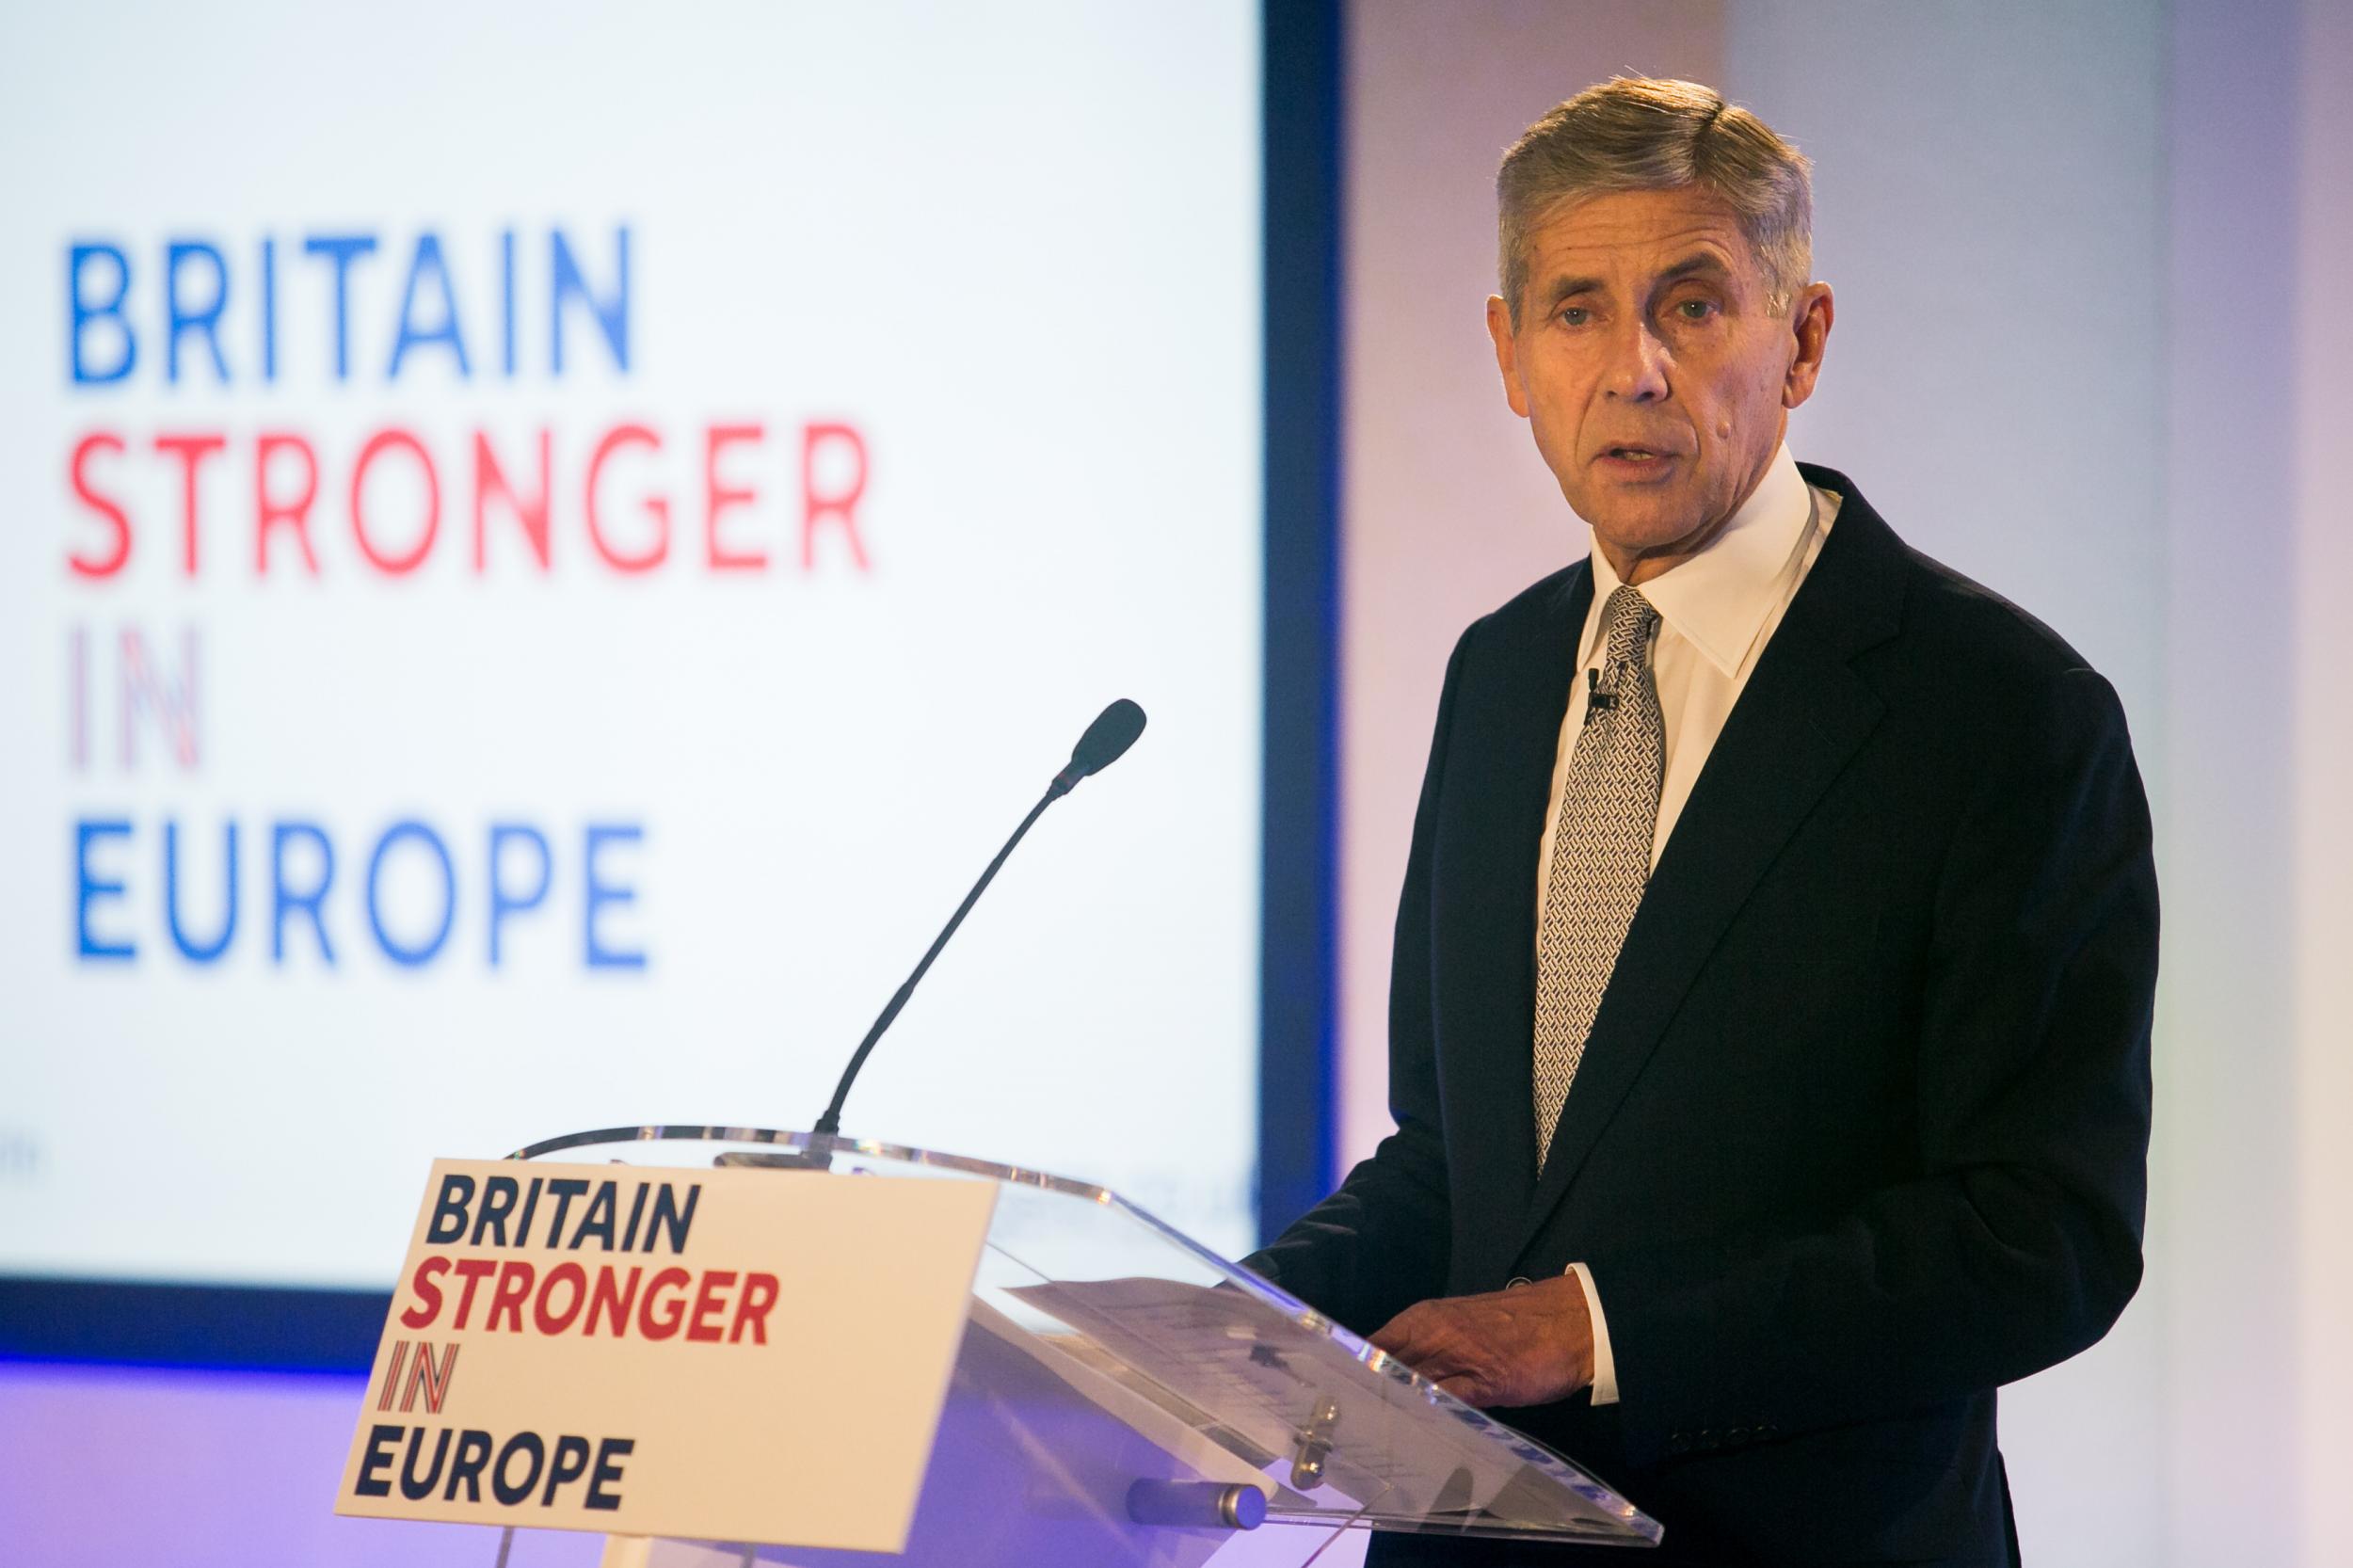 Lord Rose launches the Britain Stronger In Europe campaign